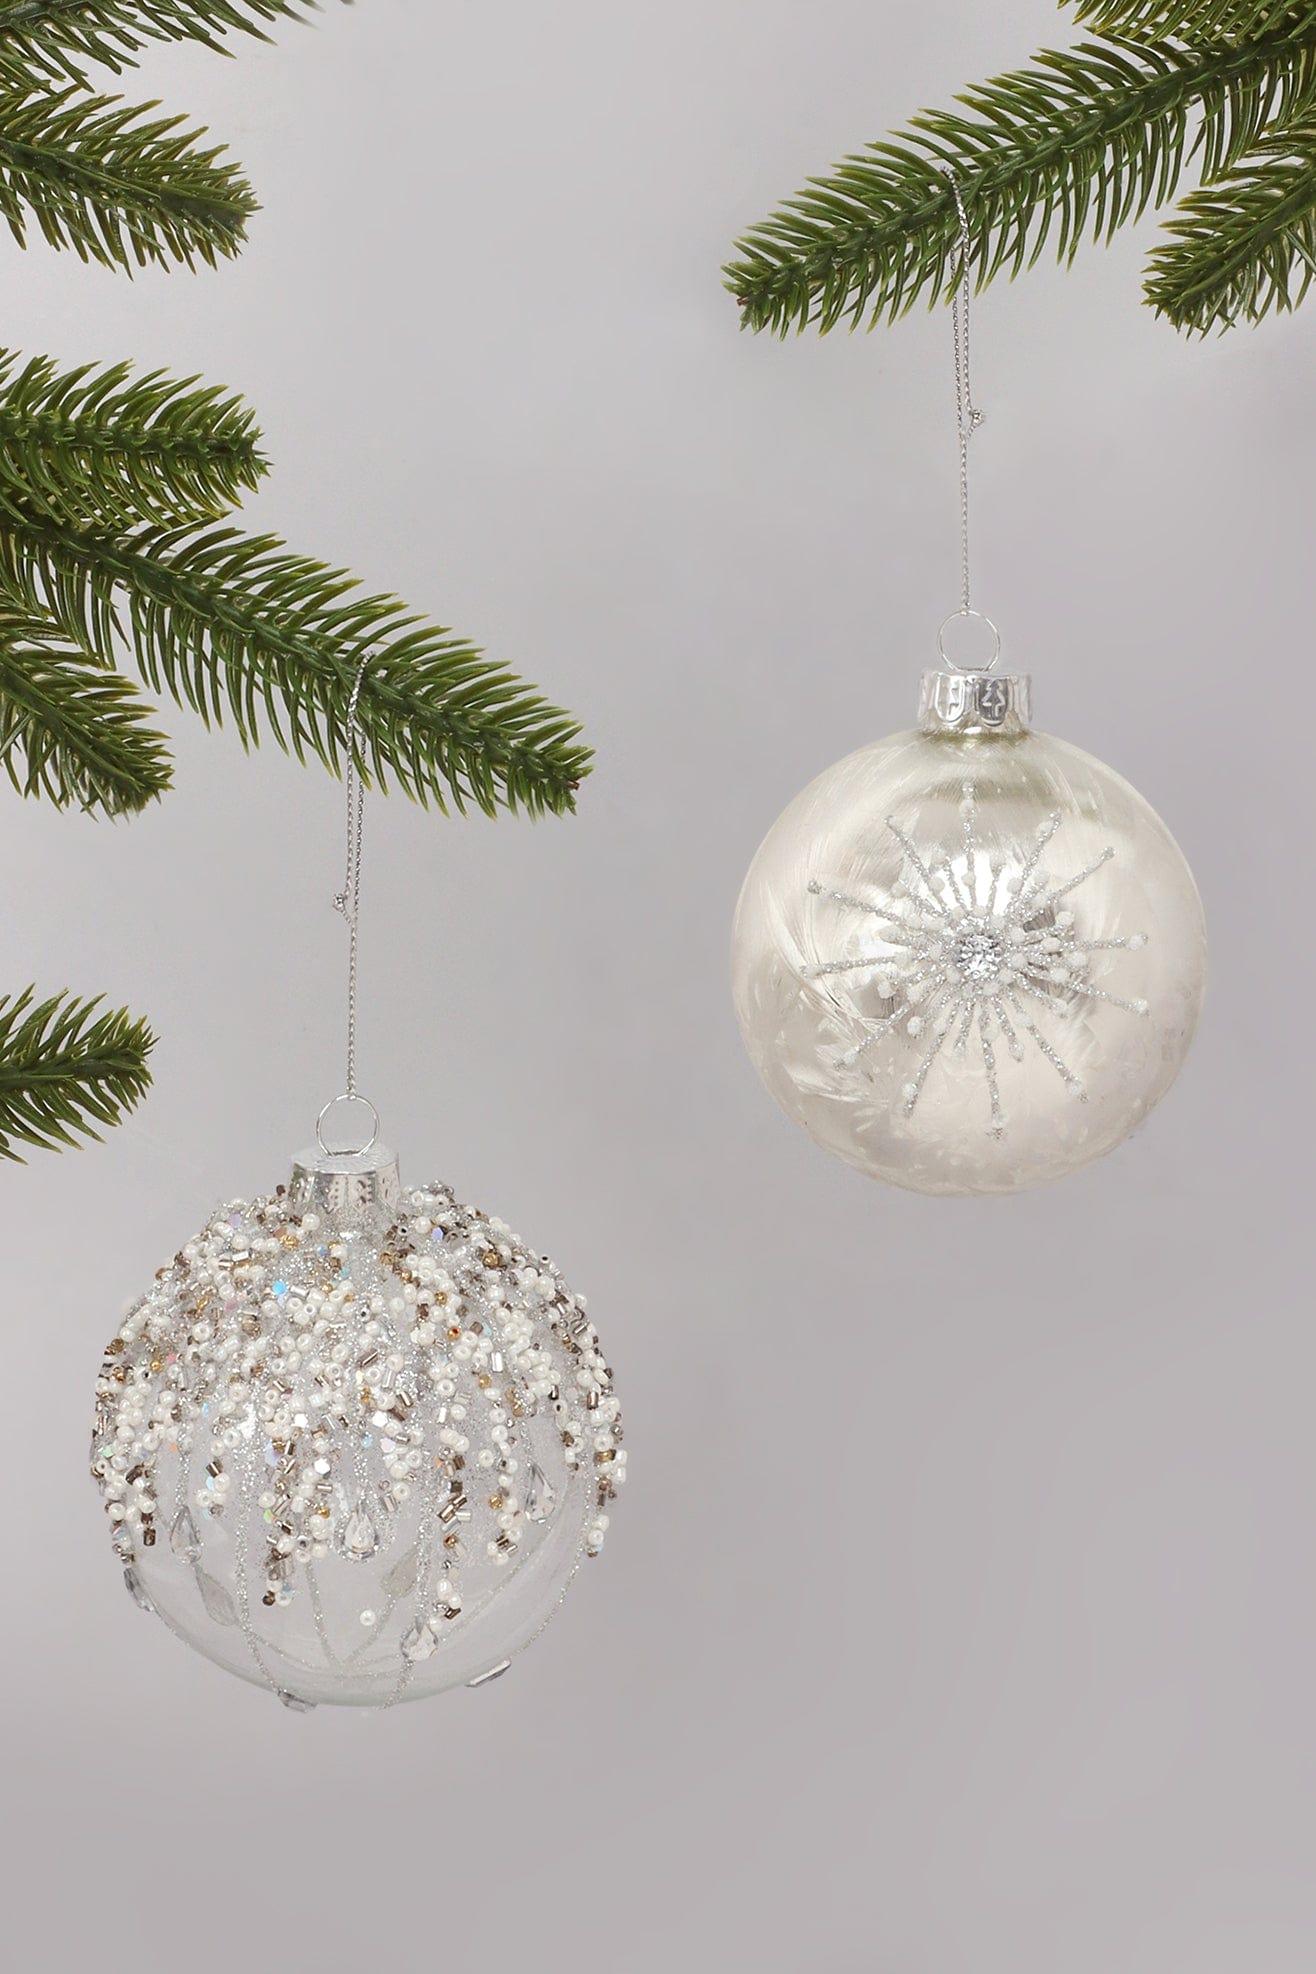 G Decor Christmas Decorations Glass Bauble with Beads and Silver Frosted Glass Bauble with Snowflake Design